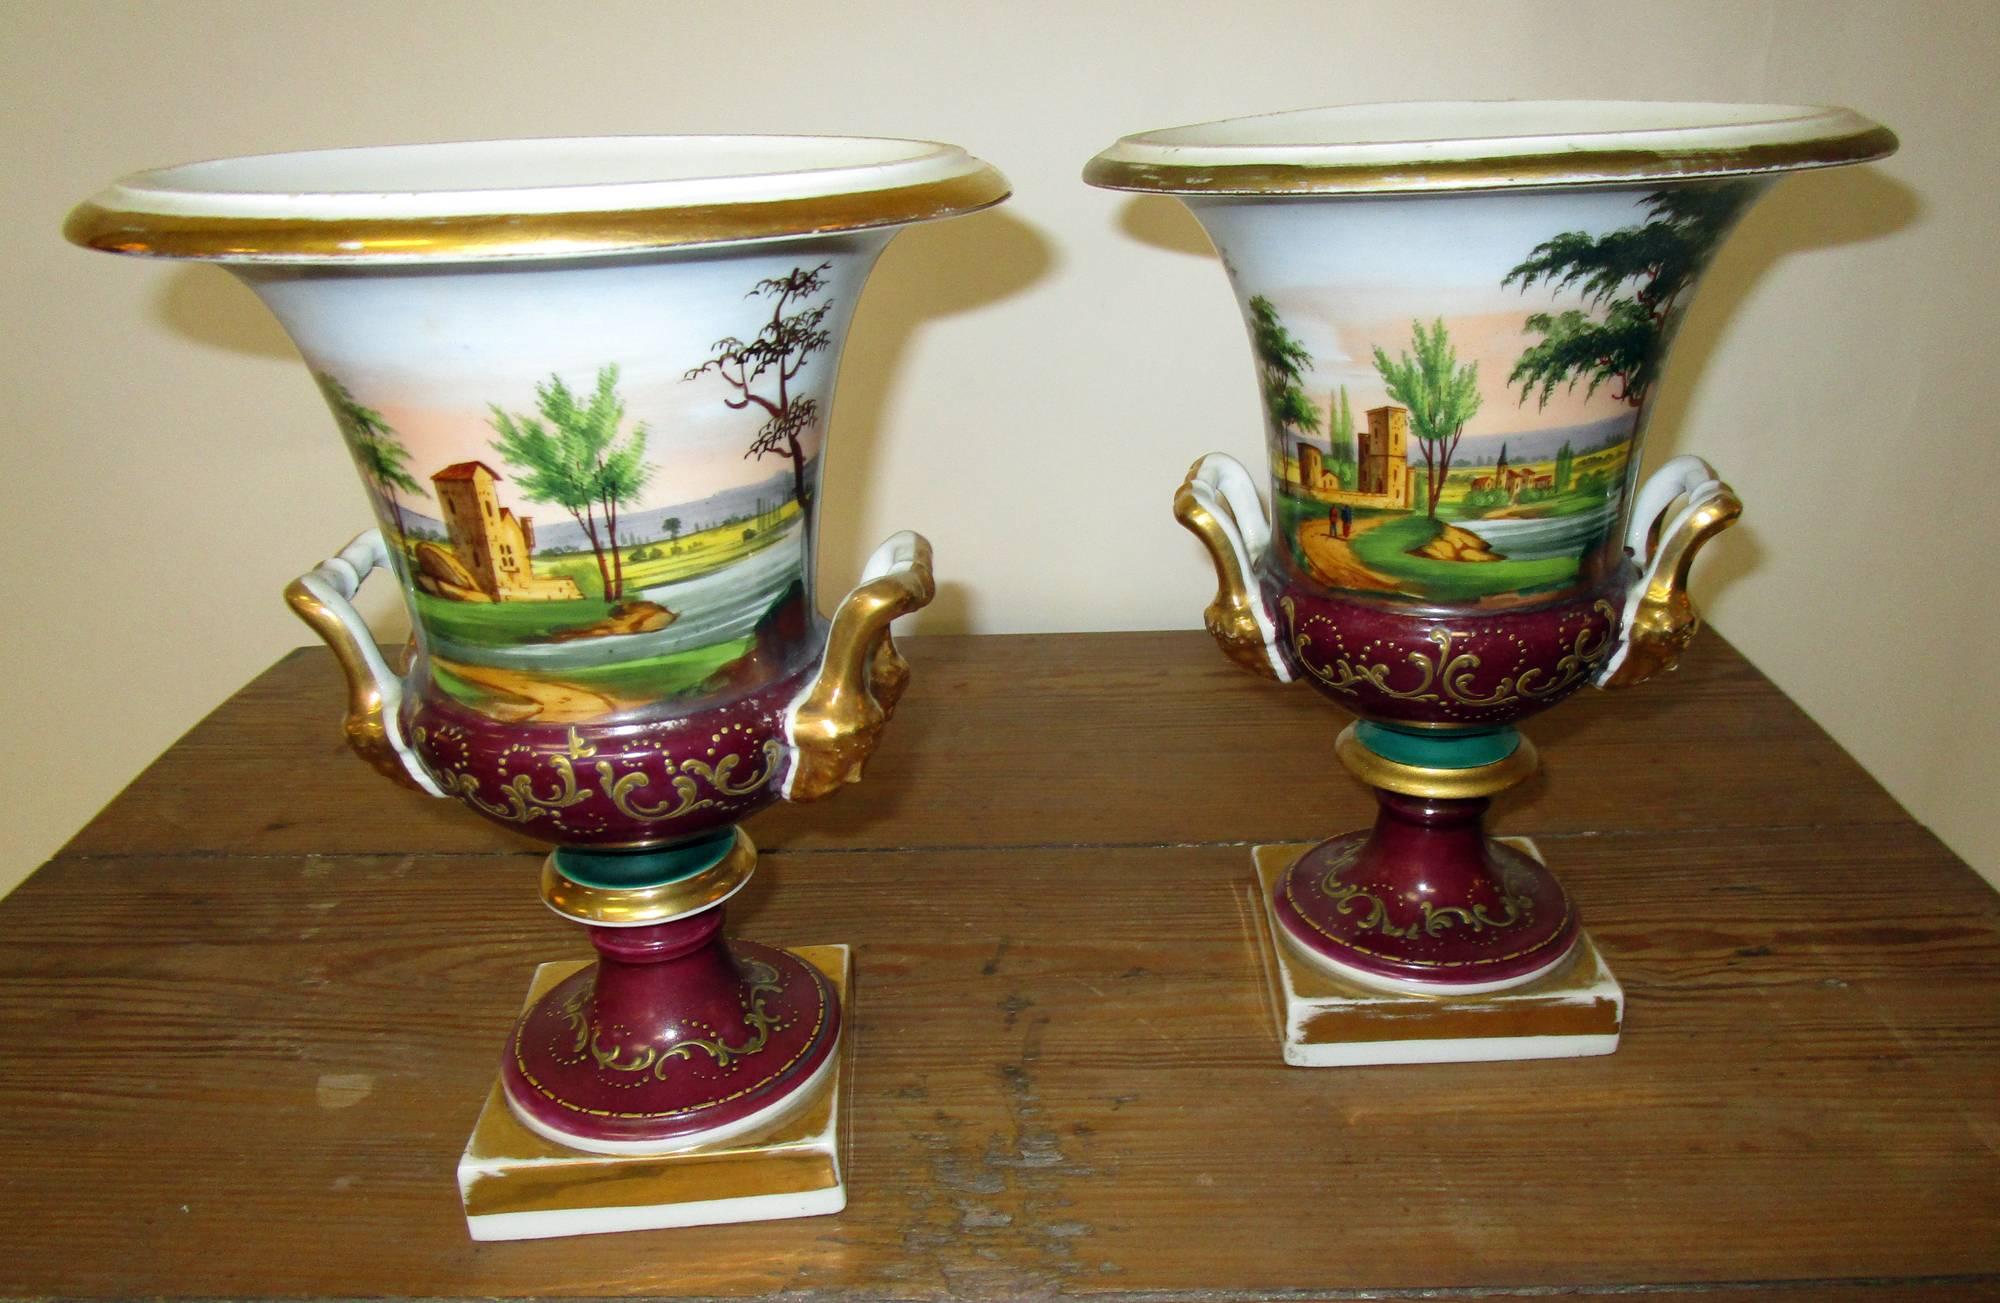 Hard paste porcelain with polychrome and gold leaf - iron bolt. Impasto decoration. Lovely colors. These classical form urns are clearly a pair, but not an identical pair. Each has a rustic scene with a different structure on each side. Bisque heads